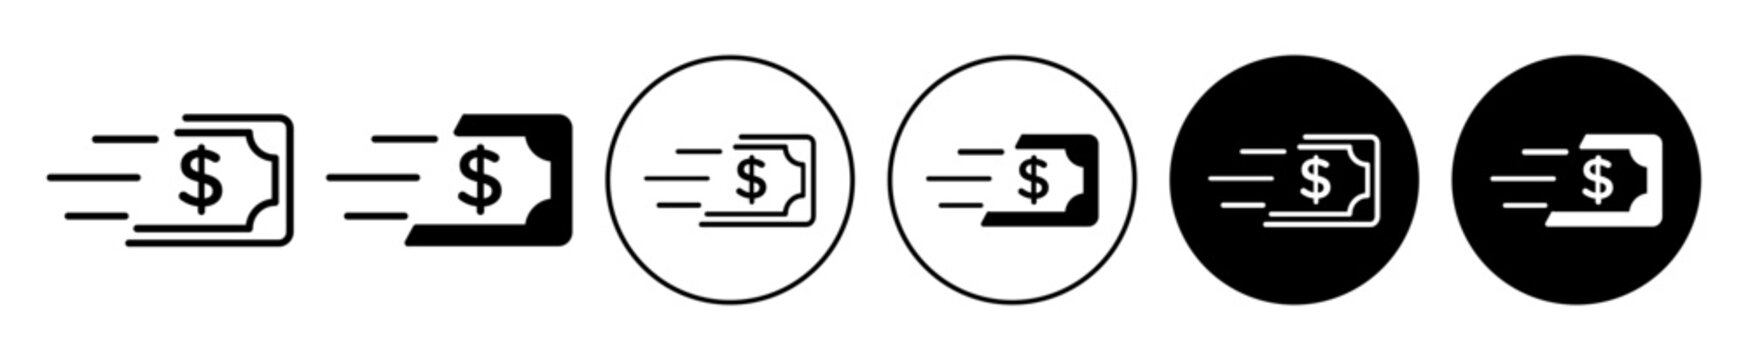 Money transfer icon set. send deposits vector symbol. pay salary icon. fast payment sign in black filled and outlined style.